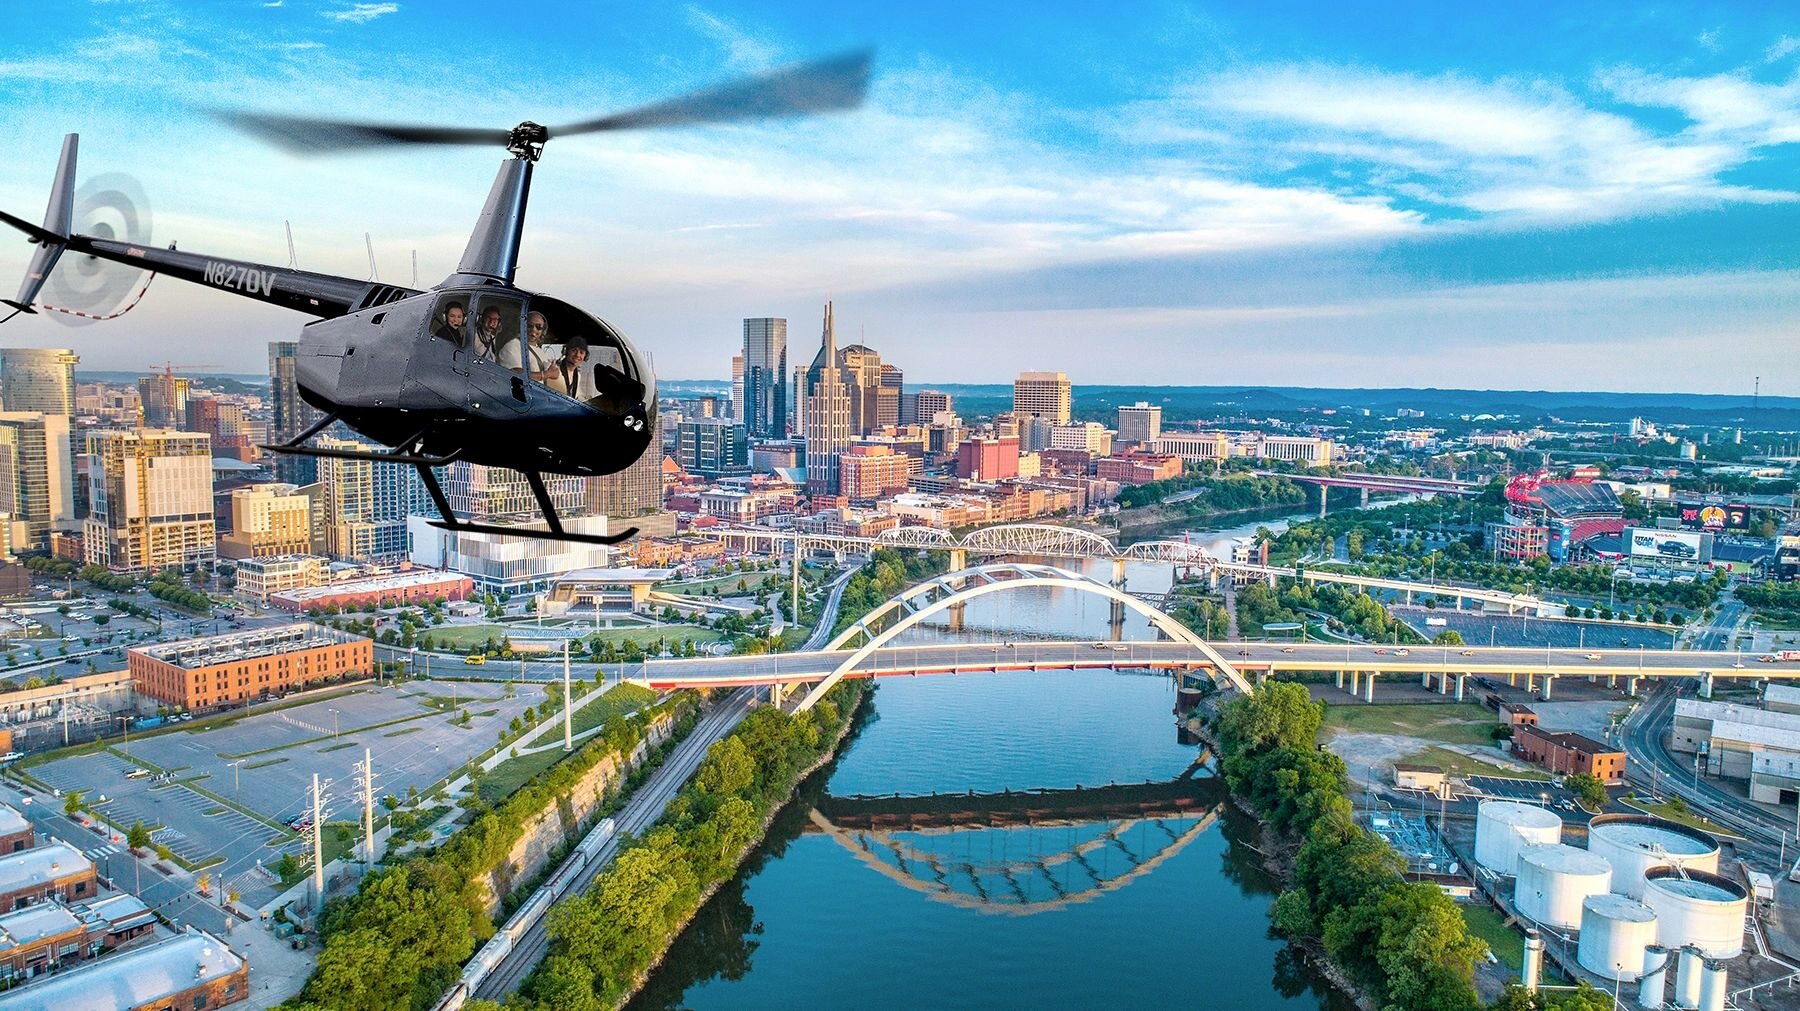 YAASSS! Take it up a notch on a private helicopter ride over the Nashville Skyline with Monarch Helicopter Tours.